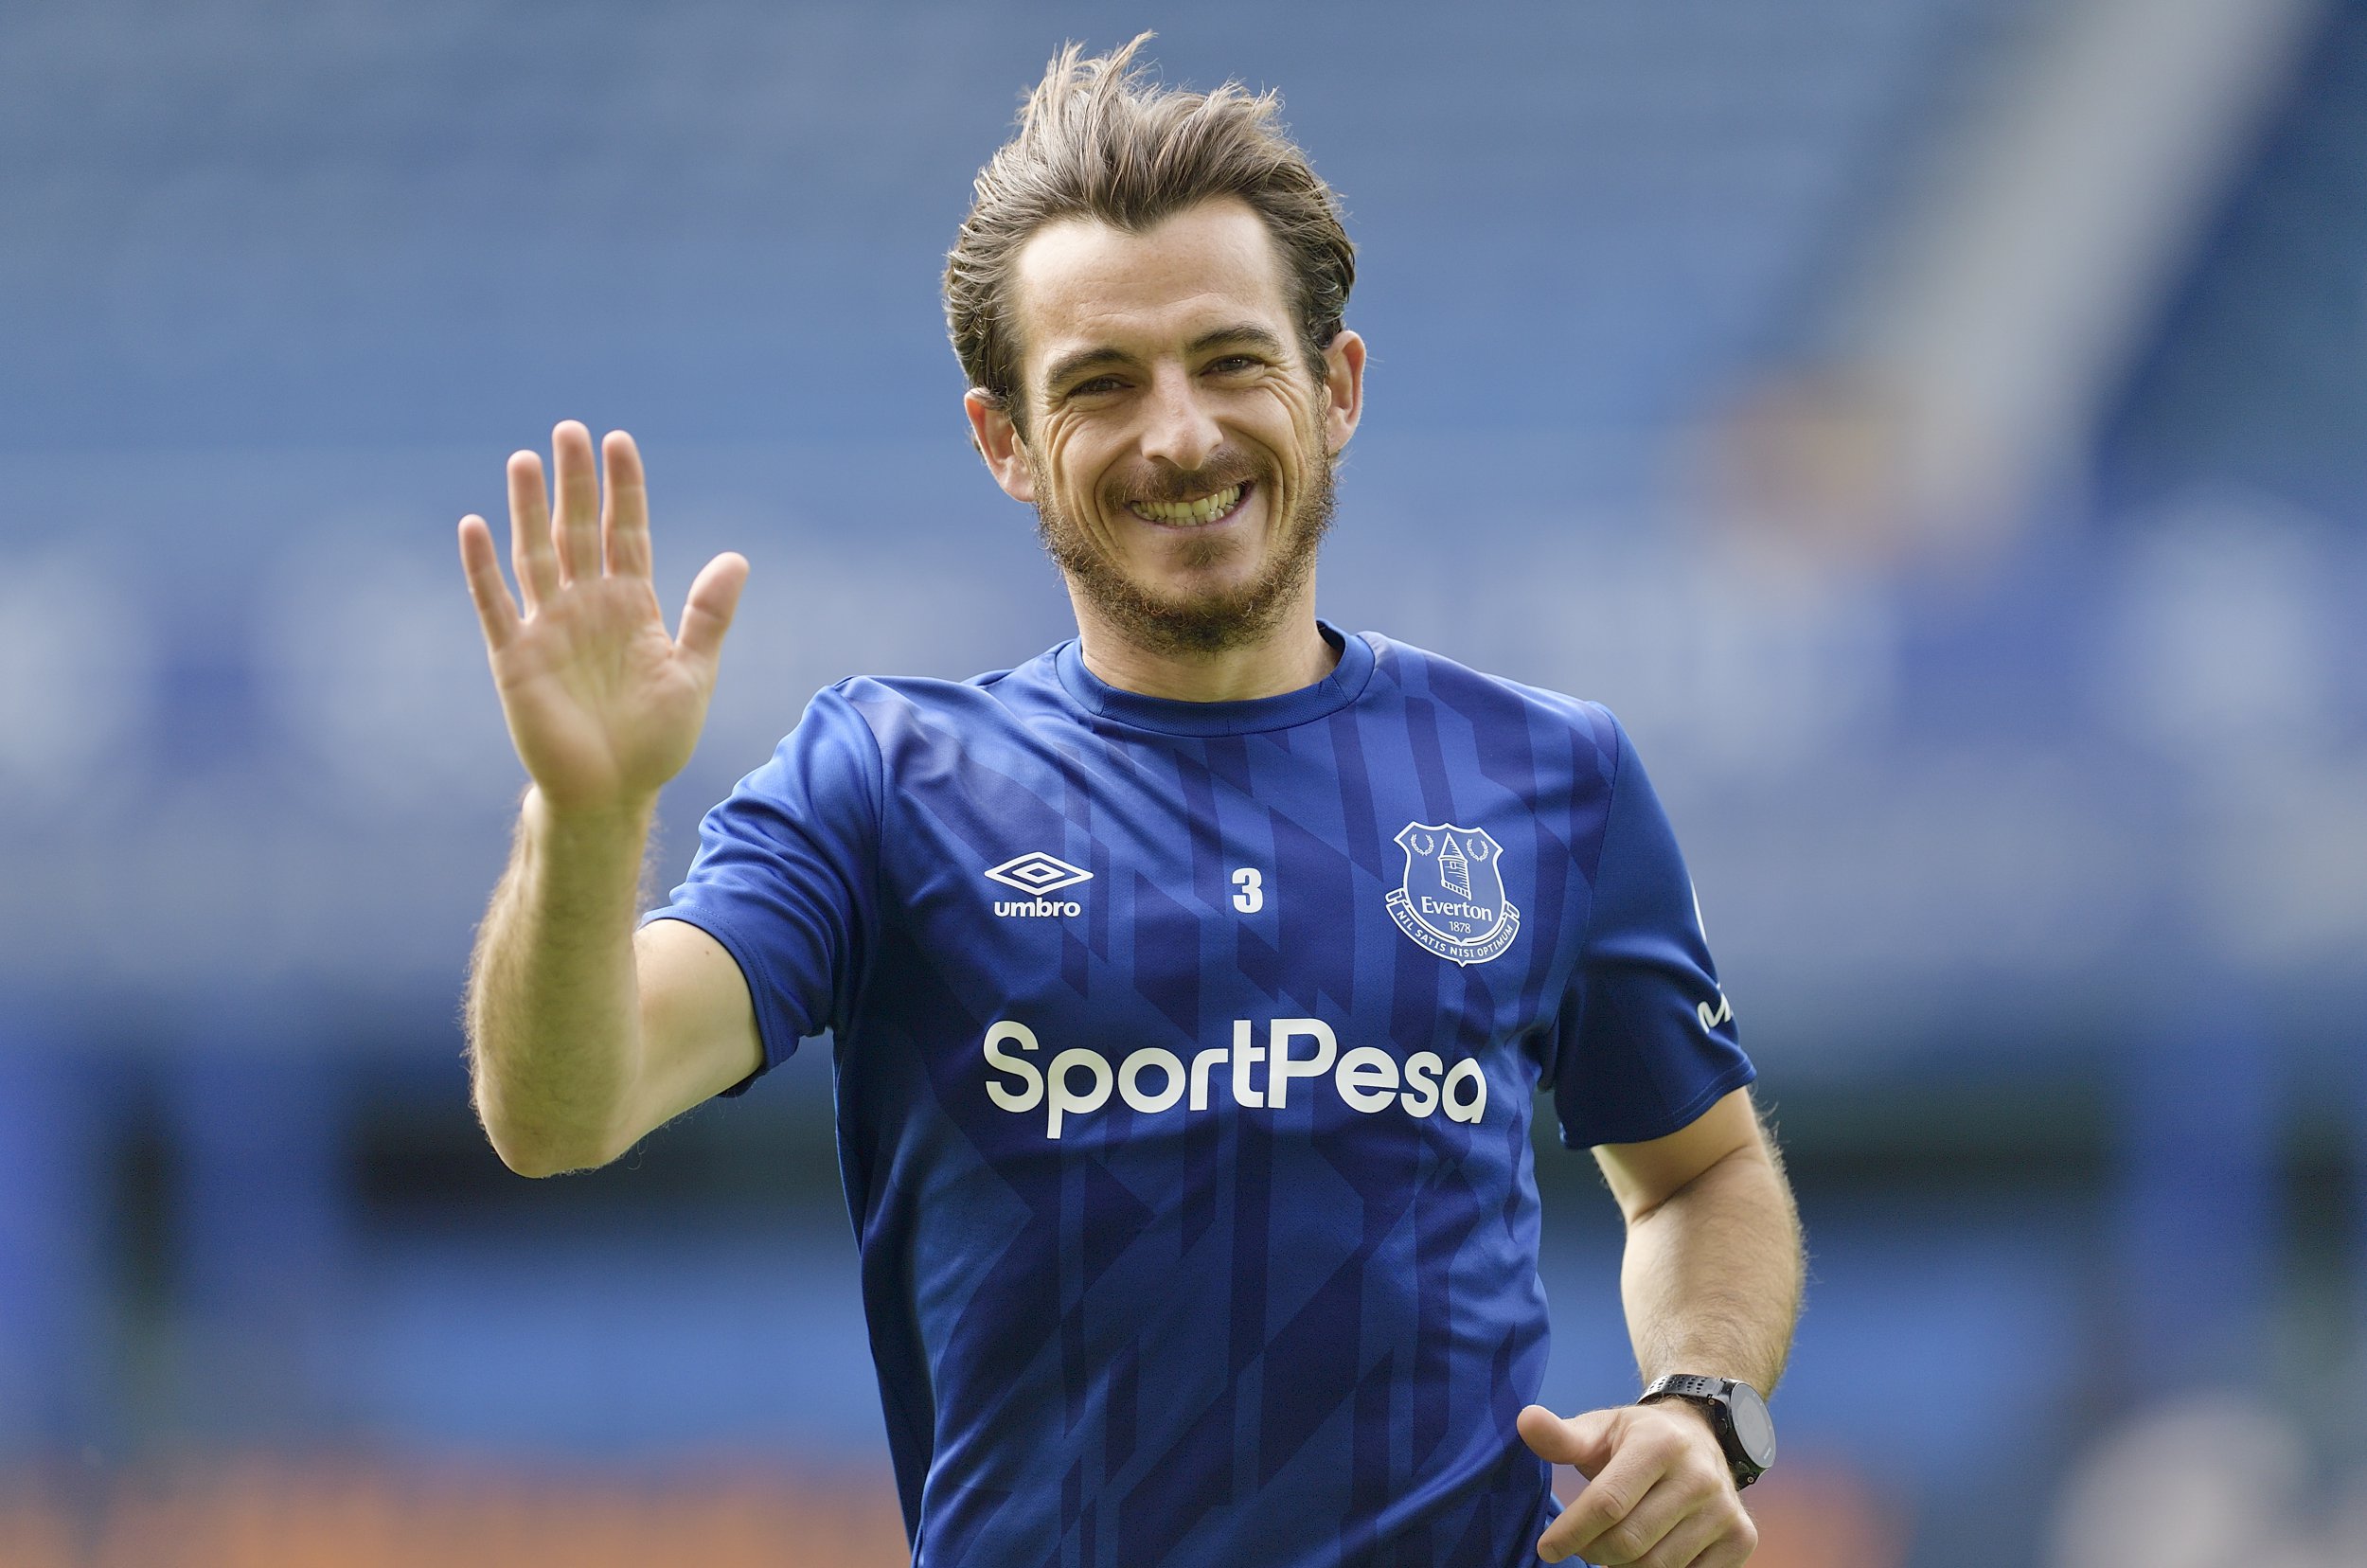 Leighton Baines: An Everton legend bows out with no crowds, no fuss - just how he always liked it